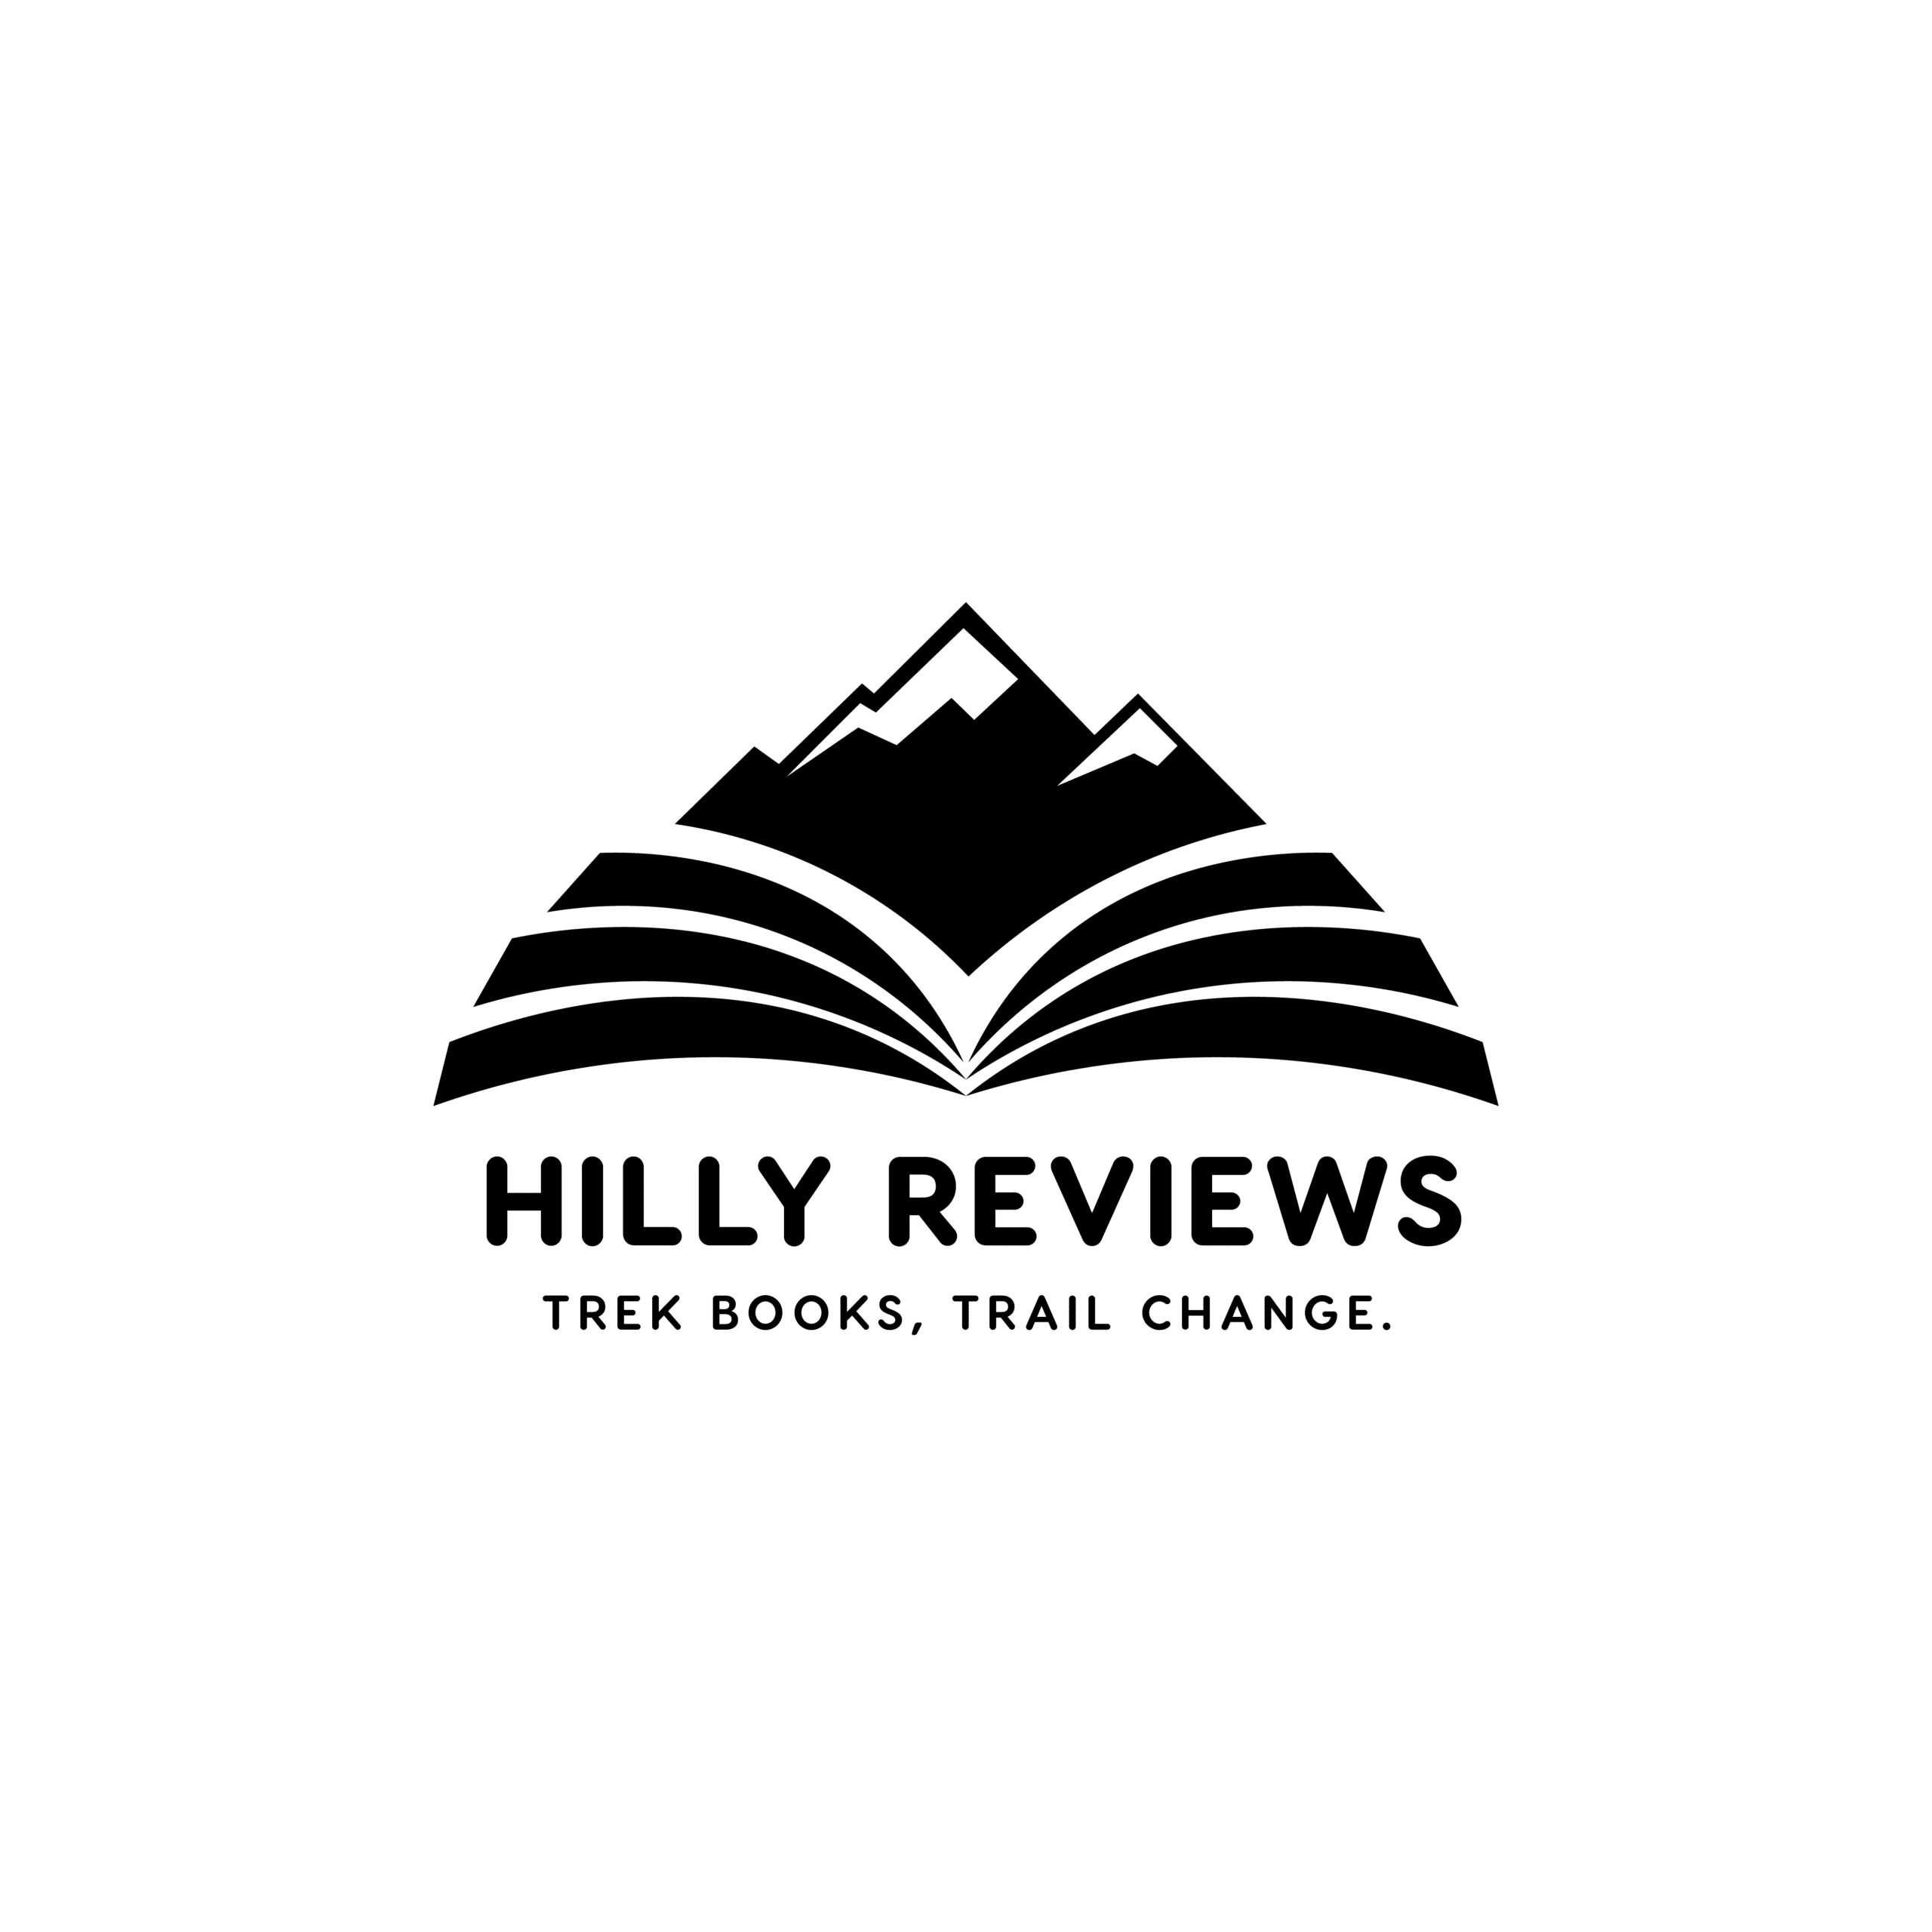 Hilly Reviews